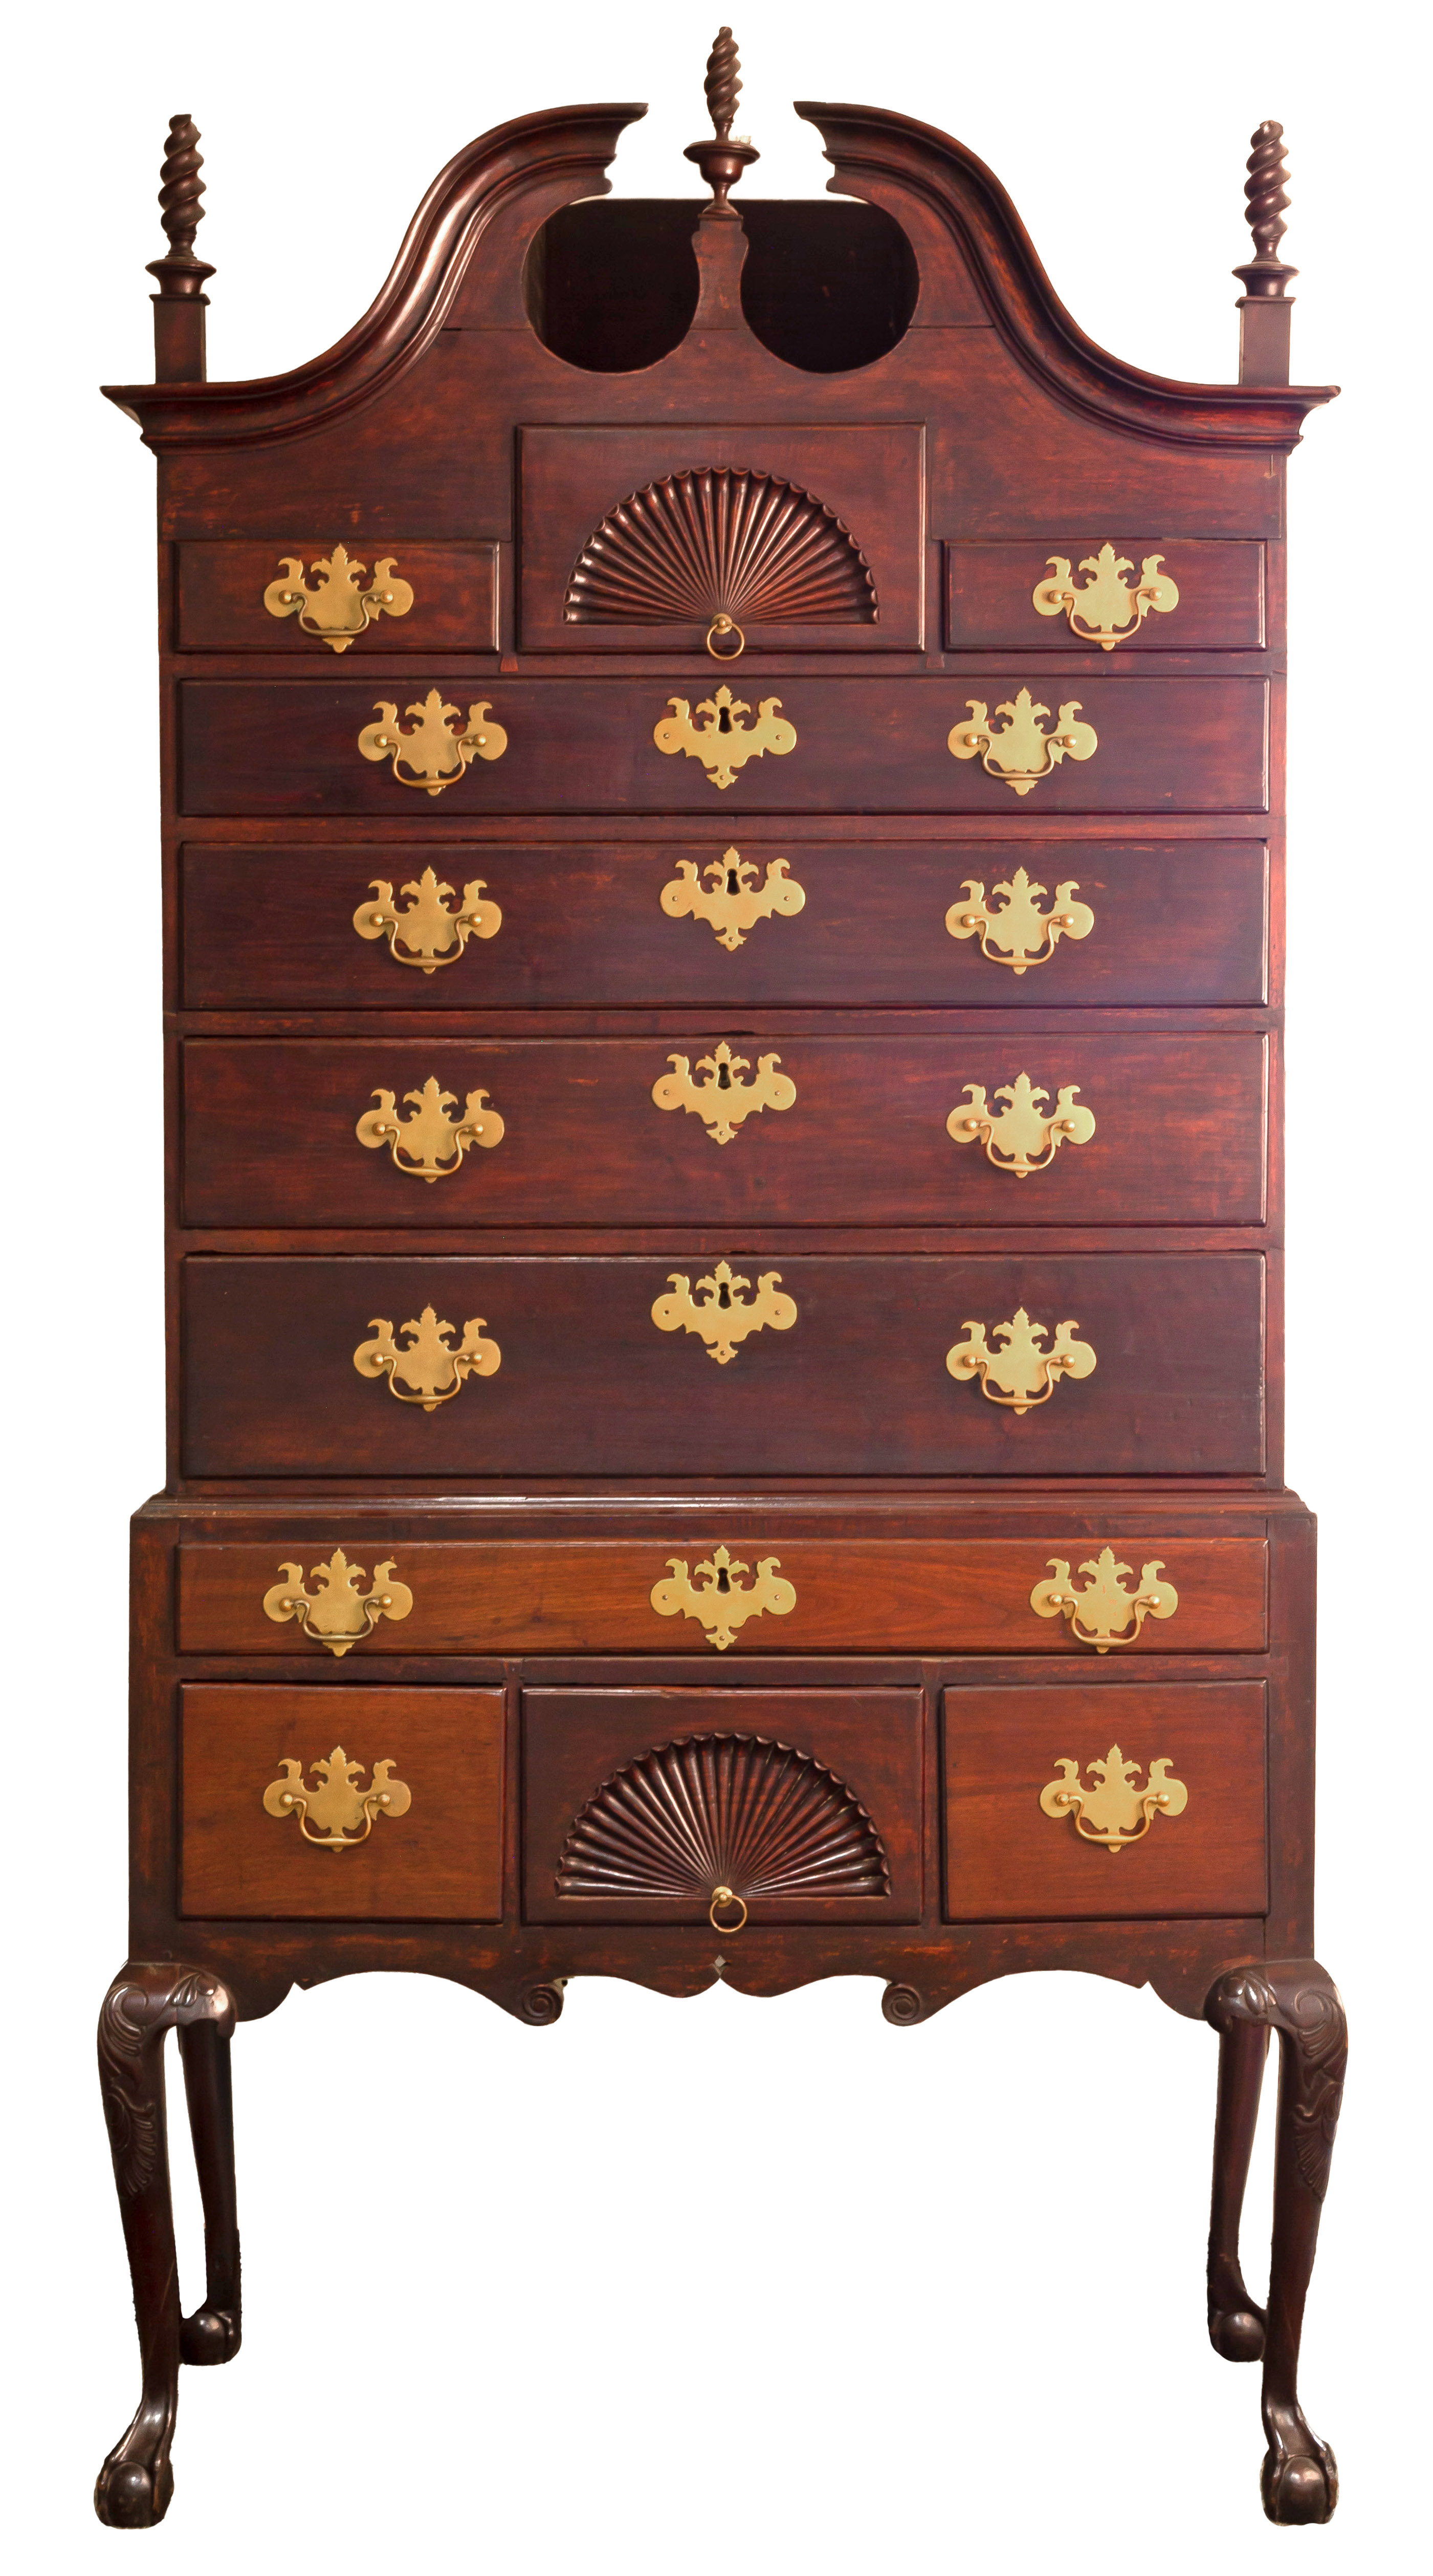 NEW ENGLAND QUEEN ANNE MAHOGANY 2c8983